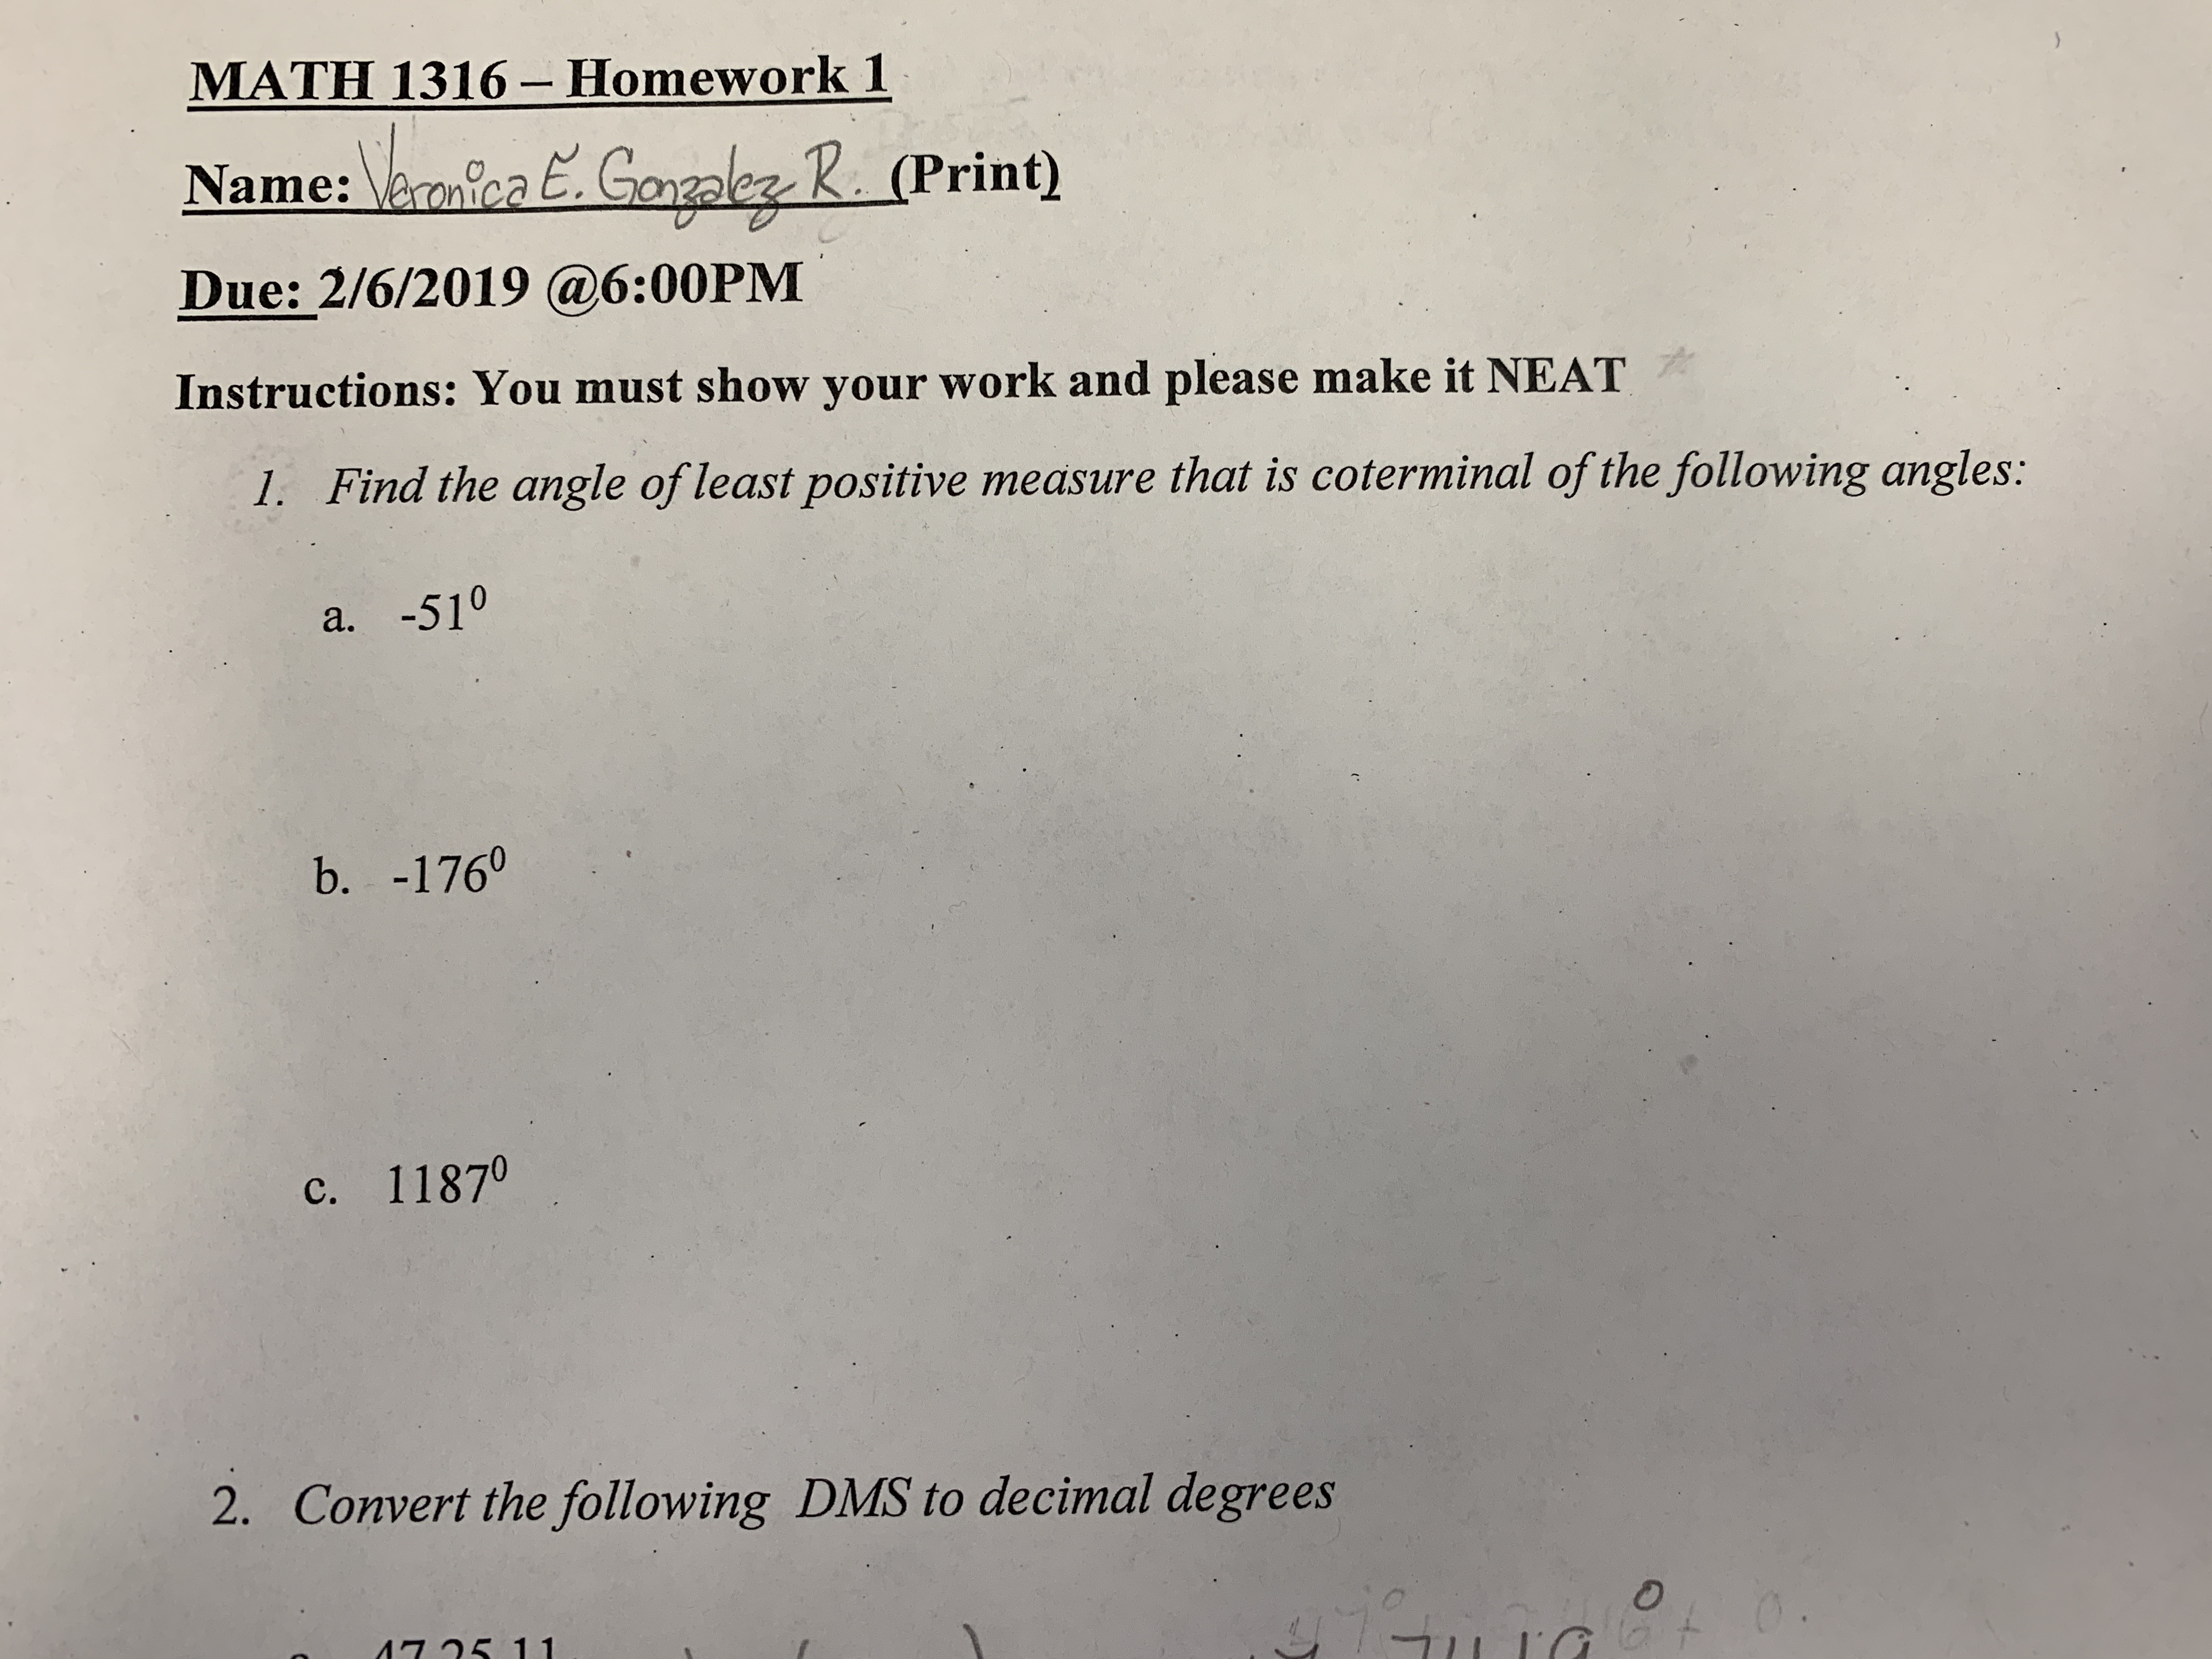 MATH 1316-Homework 1
Name: aanioGalez 2. (Print)
Due: 2/6/2019 @6:00PM
Instructions: You must show your work and please make it NEAT
1. Find the angle of least positive measure that is coterminal of the following angles:
a. -510
b. -1760
c. 11870
2.
Convert the following DMS to decimal degrees
75 11
